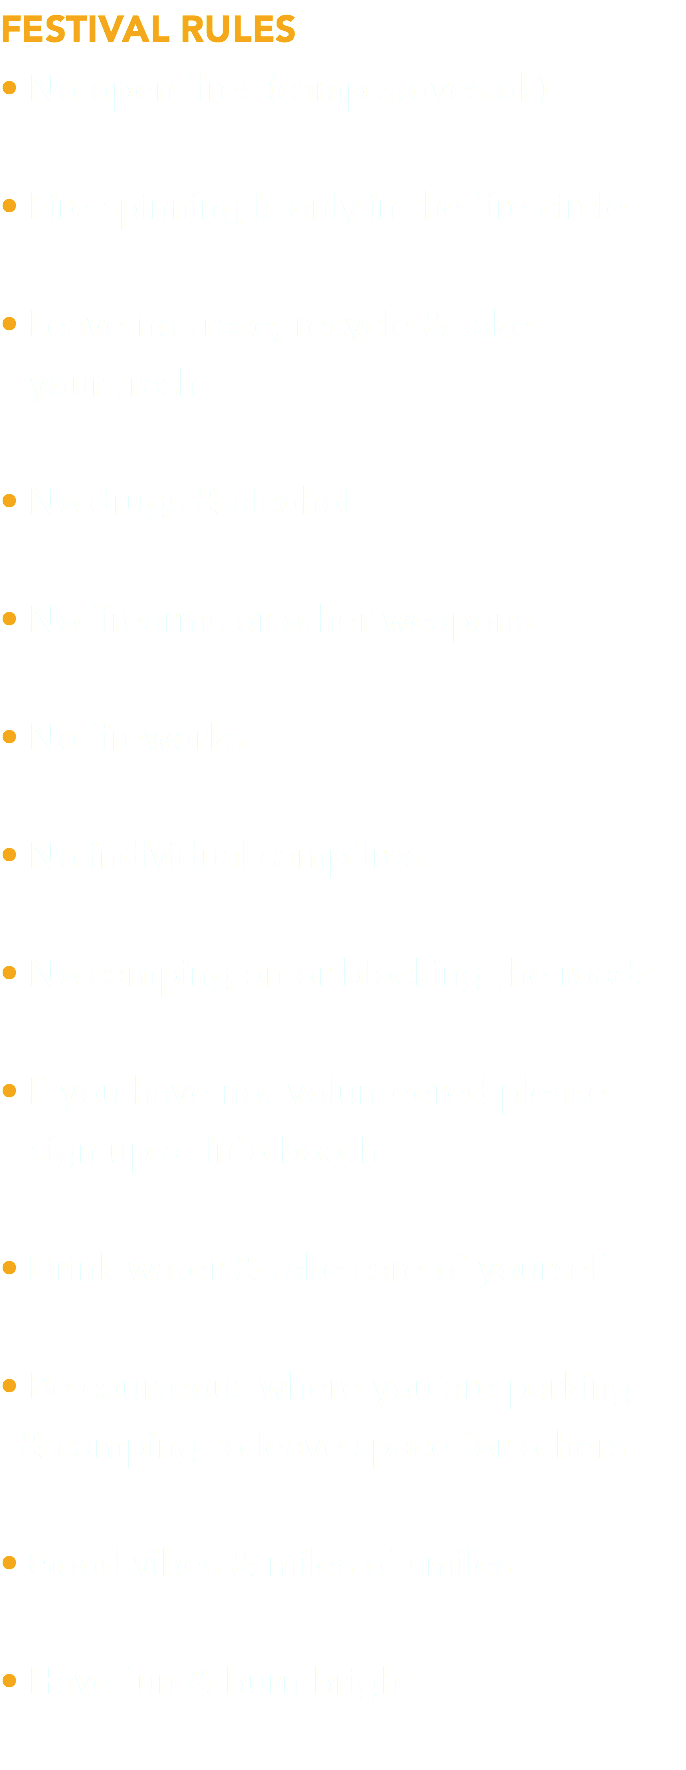 FESTIVAL RULES • No open fires (camp stoves ok) • Fire spinning is only in the fire circle • Leave no trace, recycle & take  your trash • No drugs & alcohol • No firearms or other weapons • No fireworks • No individual campfires • No camping on or blocking the roads • If you have not volunteered please  sign up at info booth • Drink water & take care of yourself • Be courteous where you are parking  & camping to leave space for others • Good vibes & miles of smiles • Have fun & burn bright 